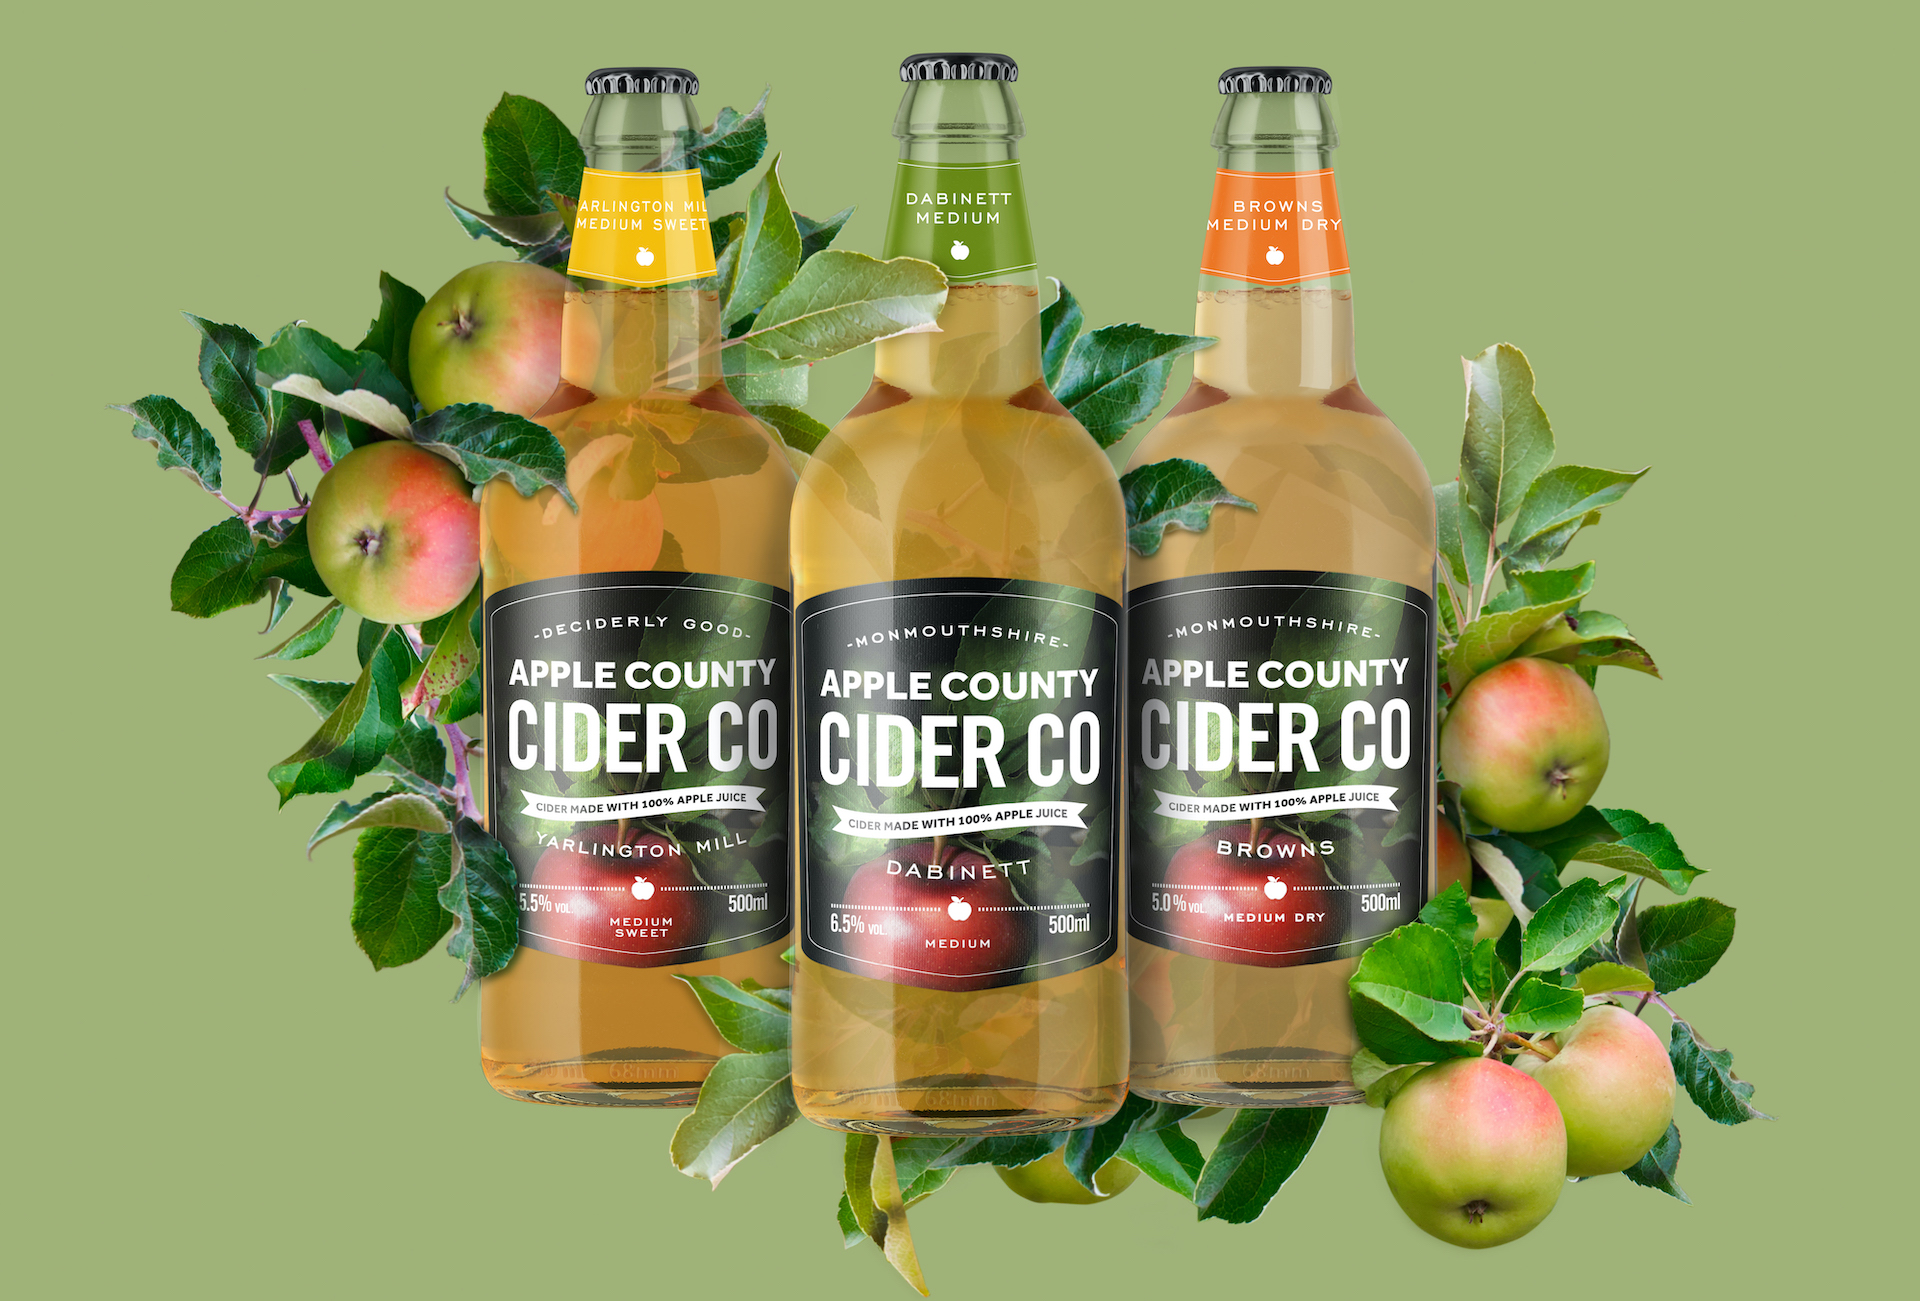 The main range of Apple County Cider Company ciders in bottles